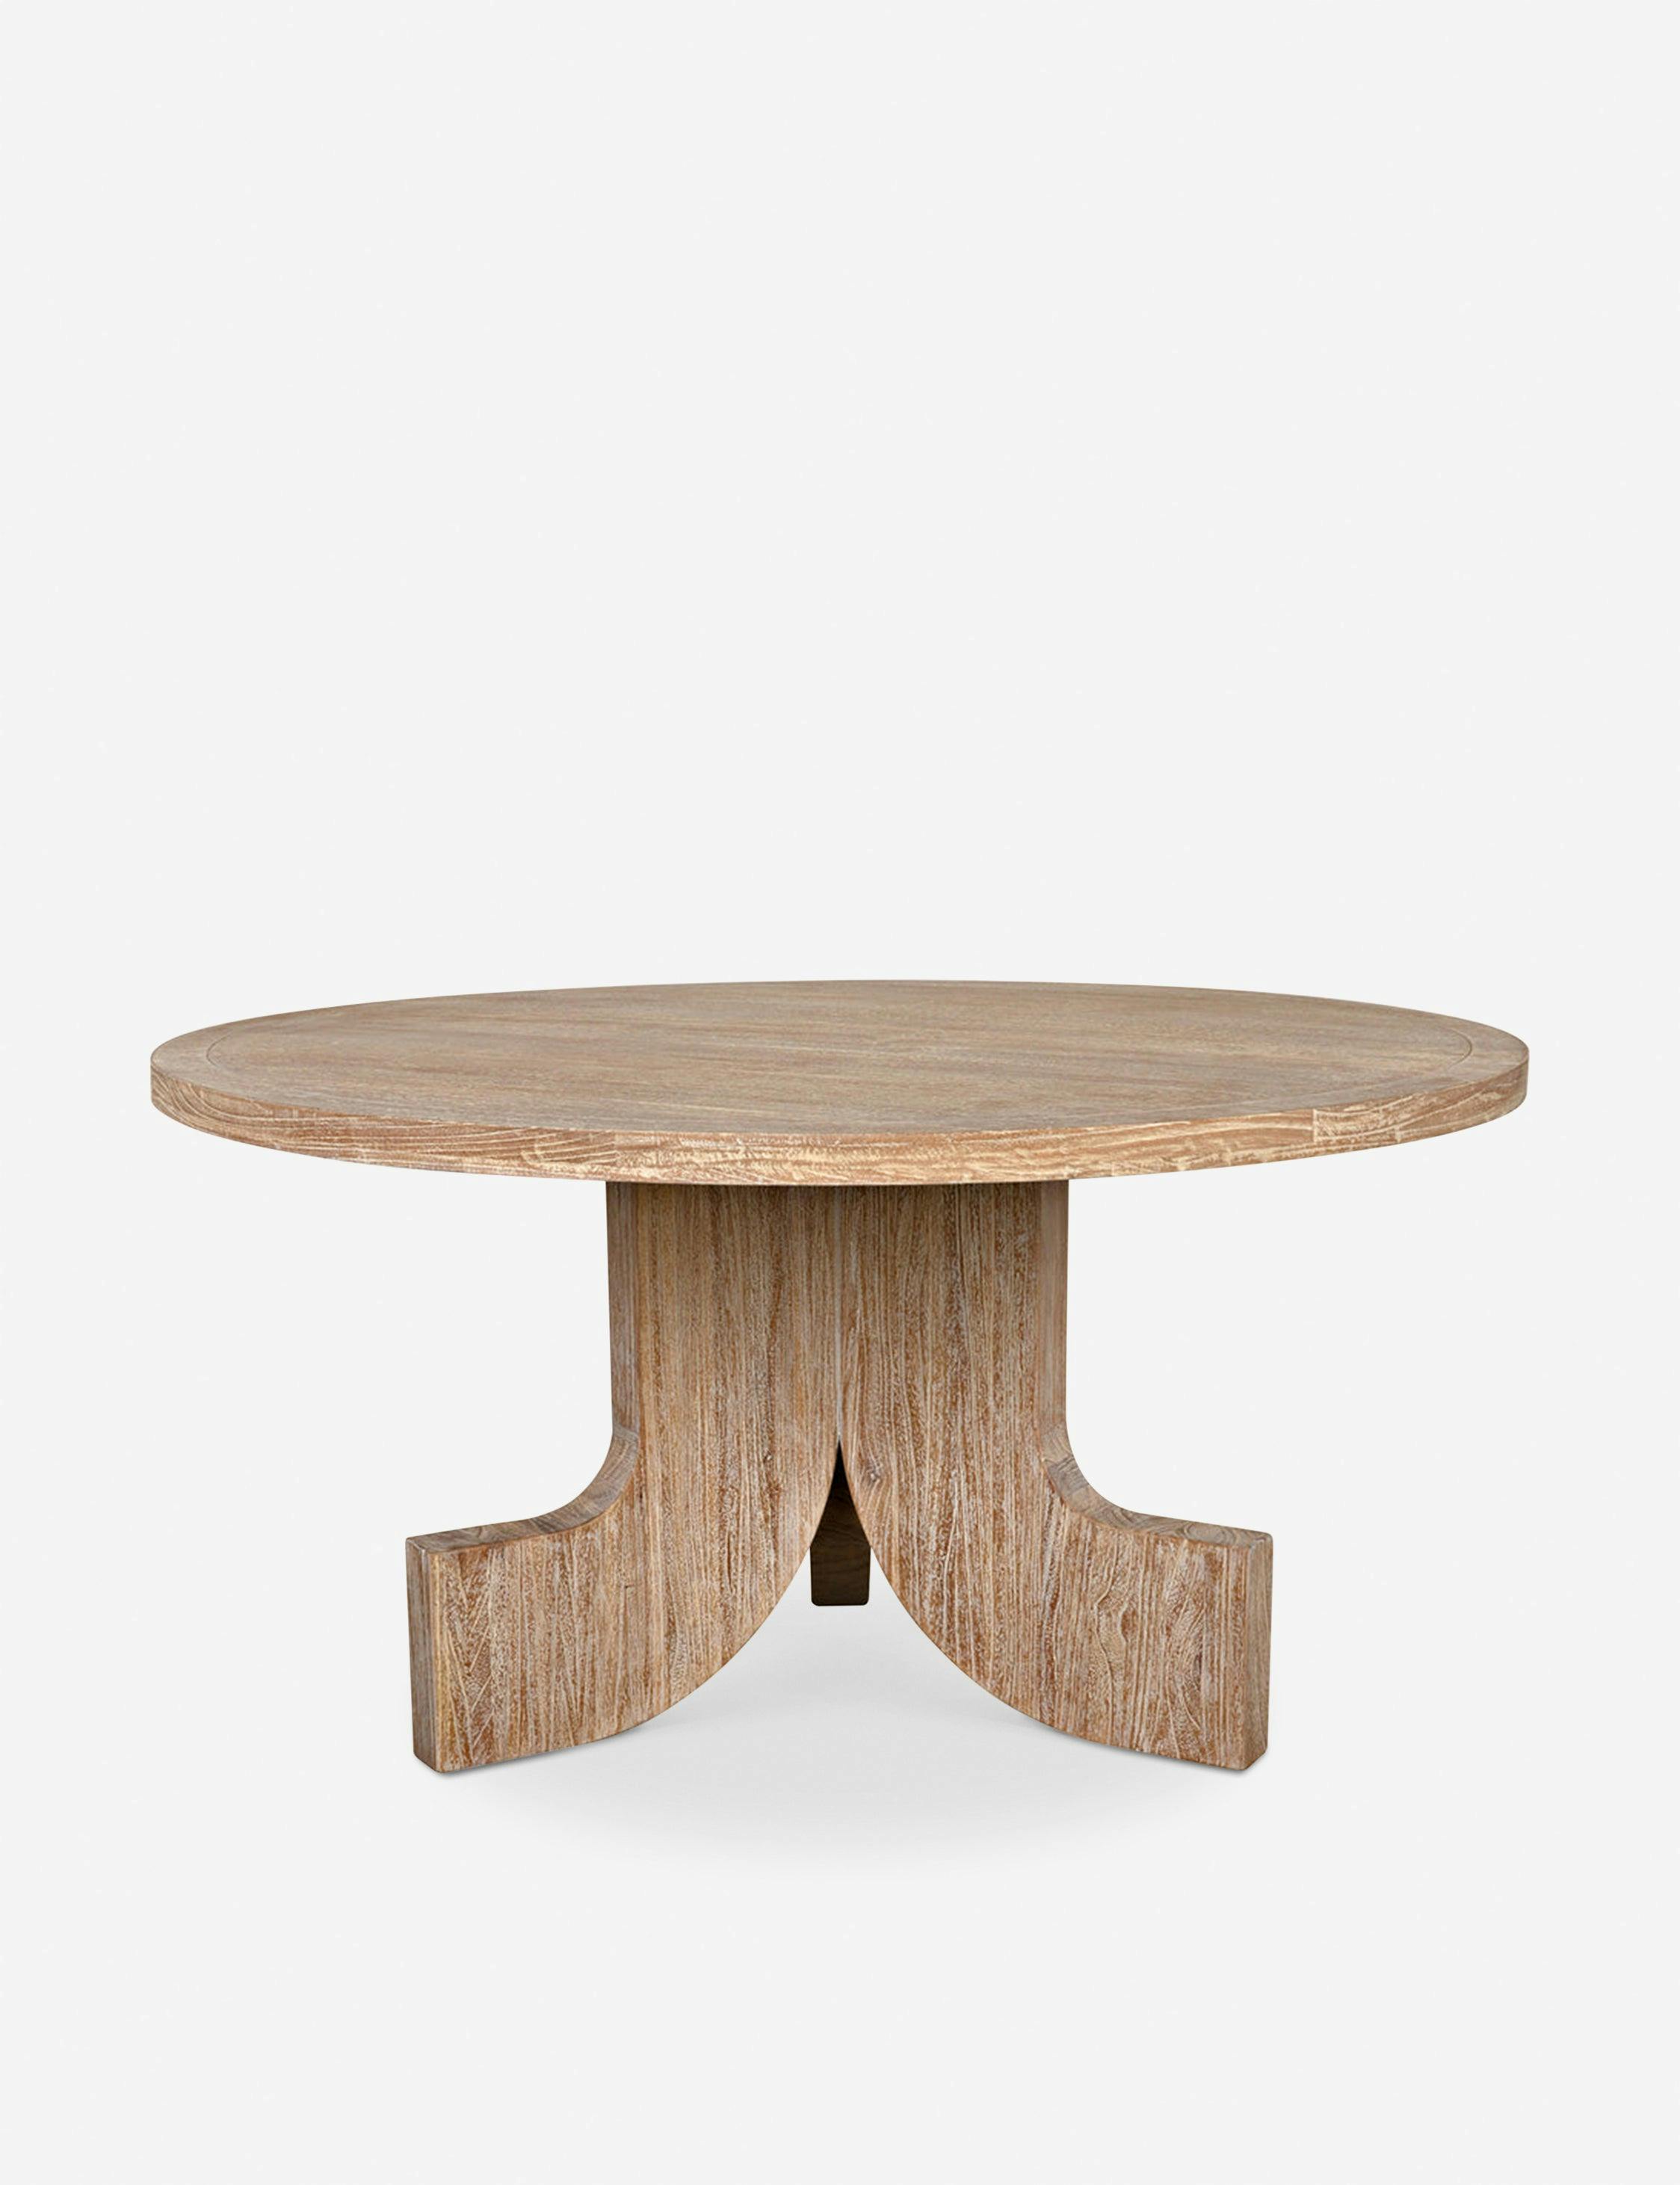 Farmhouse Chic 59" Round Natural Wood Dining Table